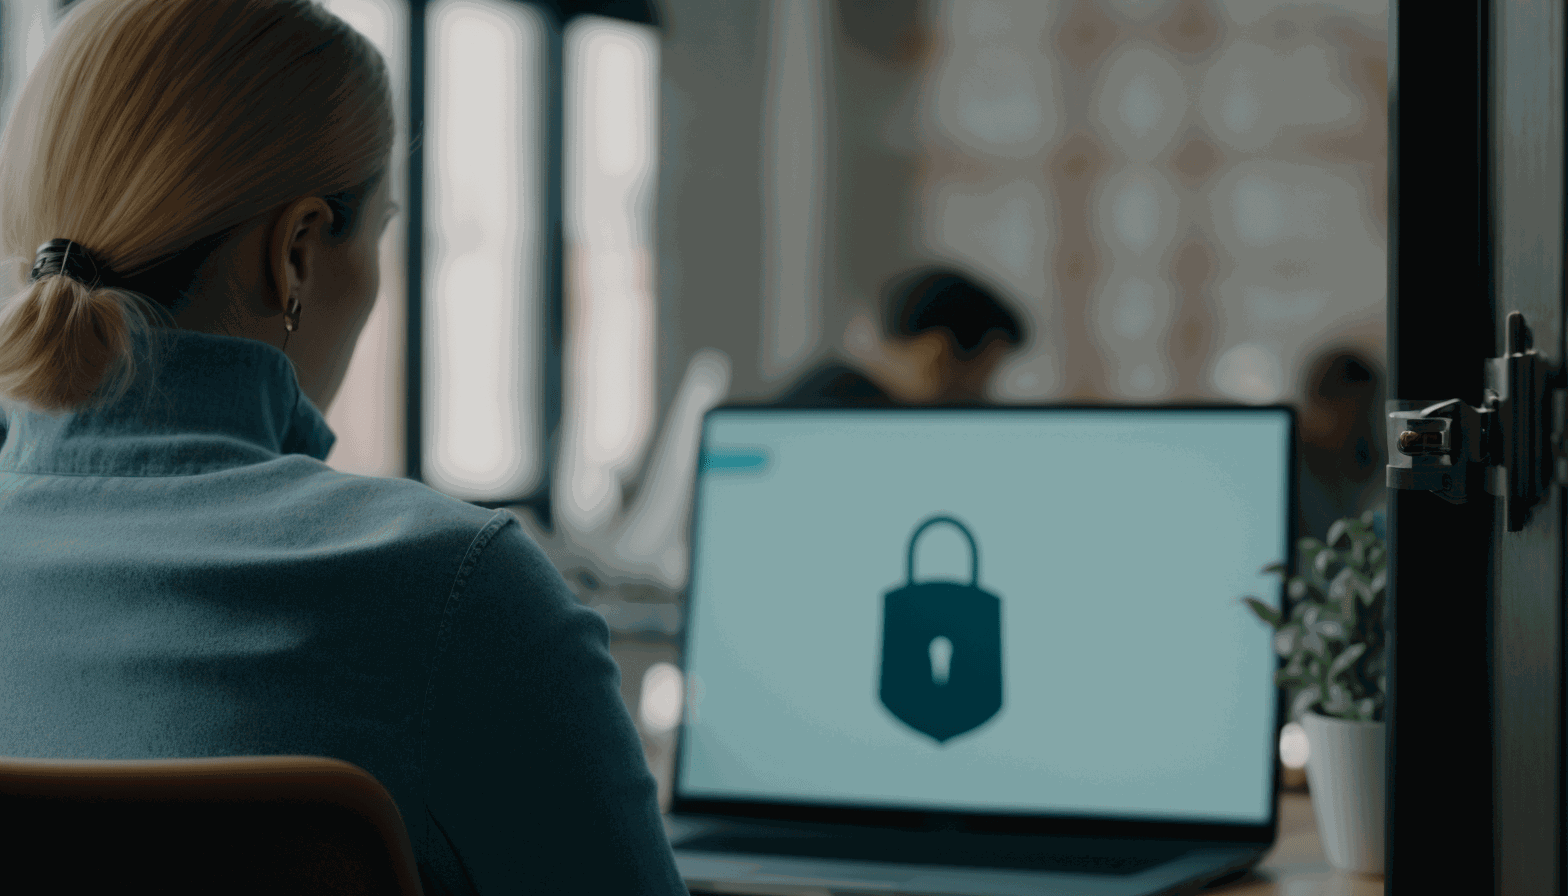 An image of a person sitting at their workstation with a security lock in the foreground, indicating the importance of securing workstations.